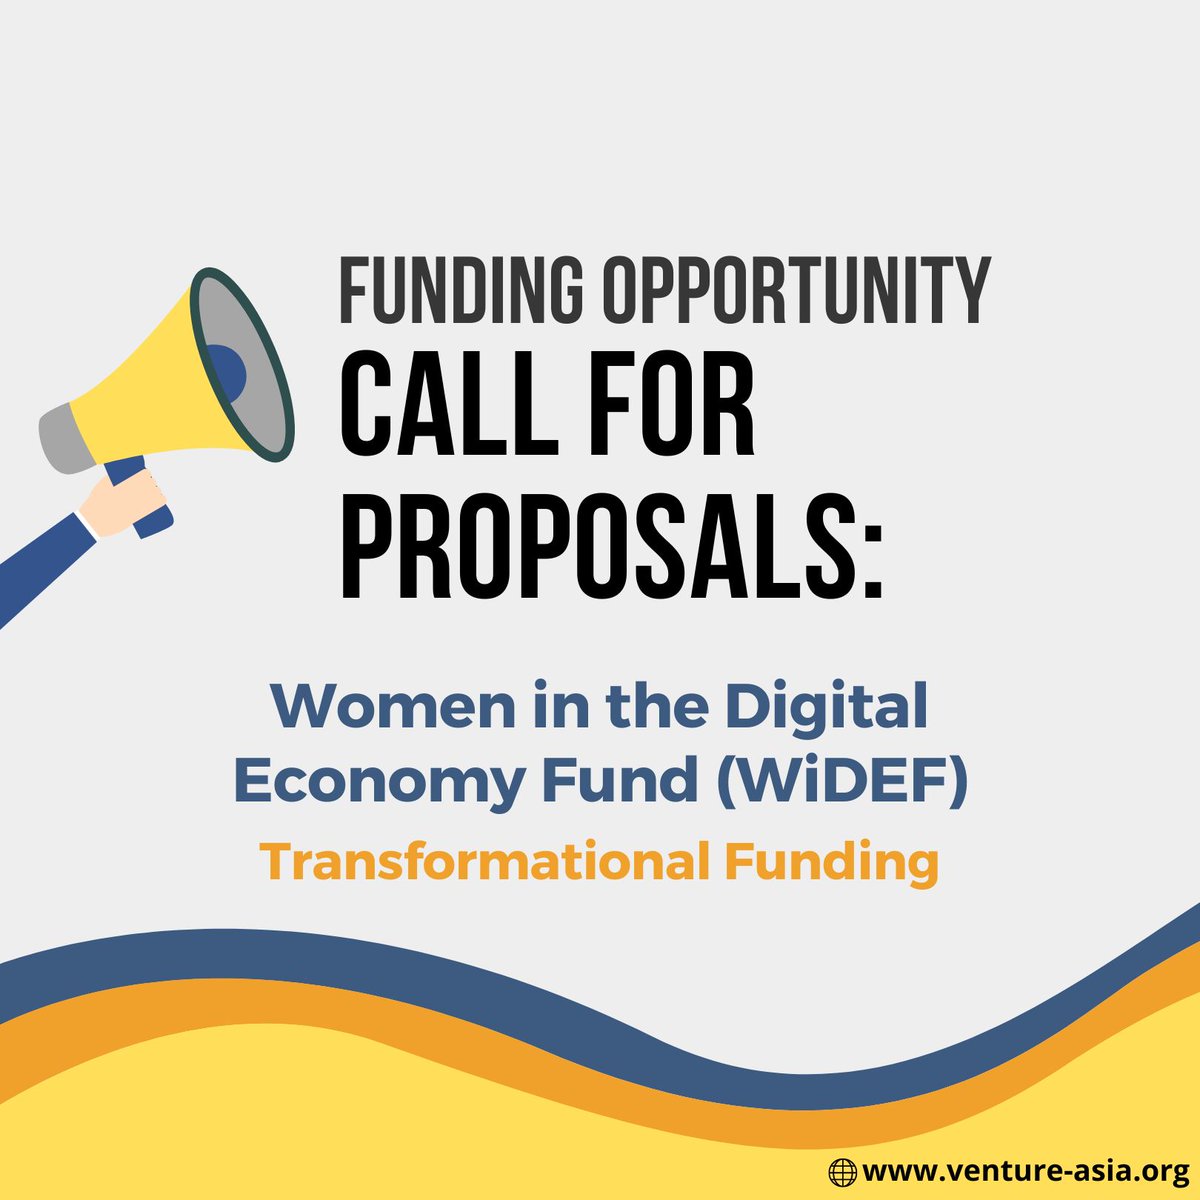 The Women in the Digital Economy Fund (WiDEF) announced its first round of grant funding available for solutions working to close the gender digital divide.